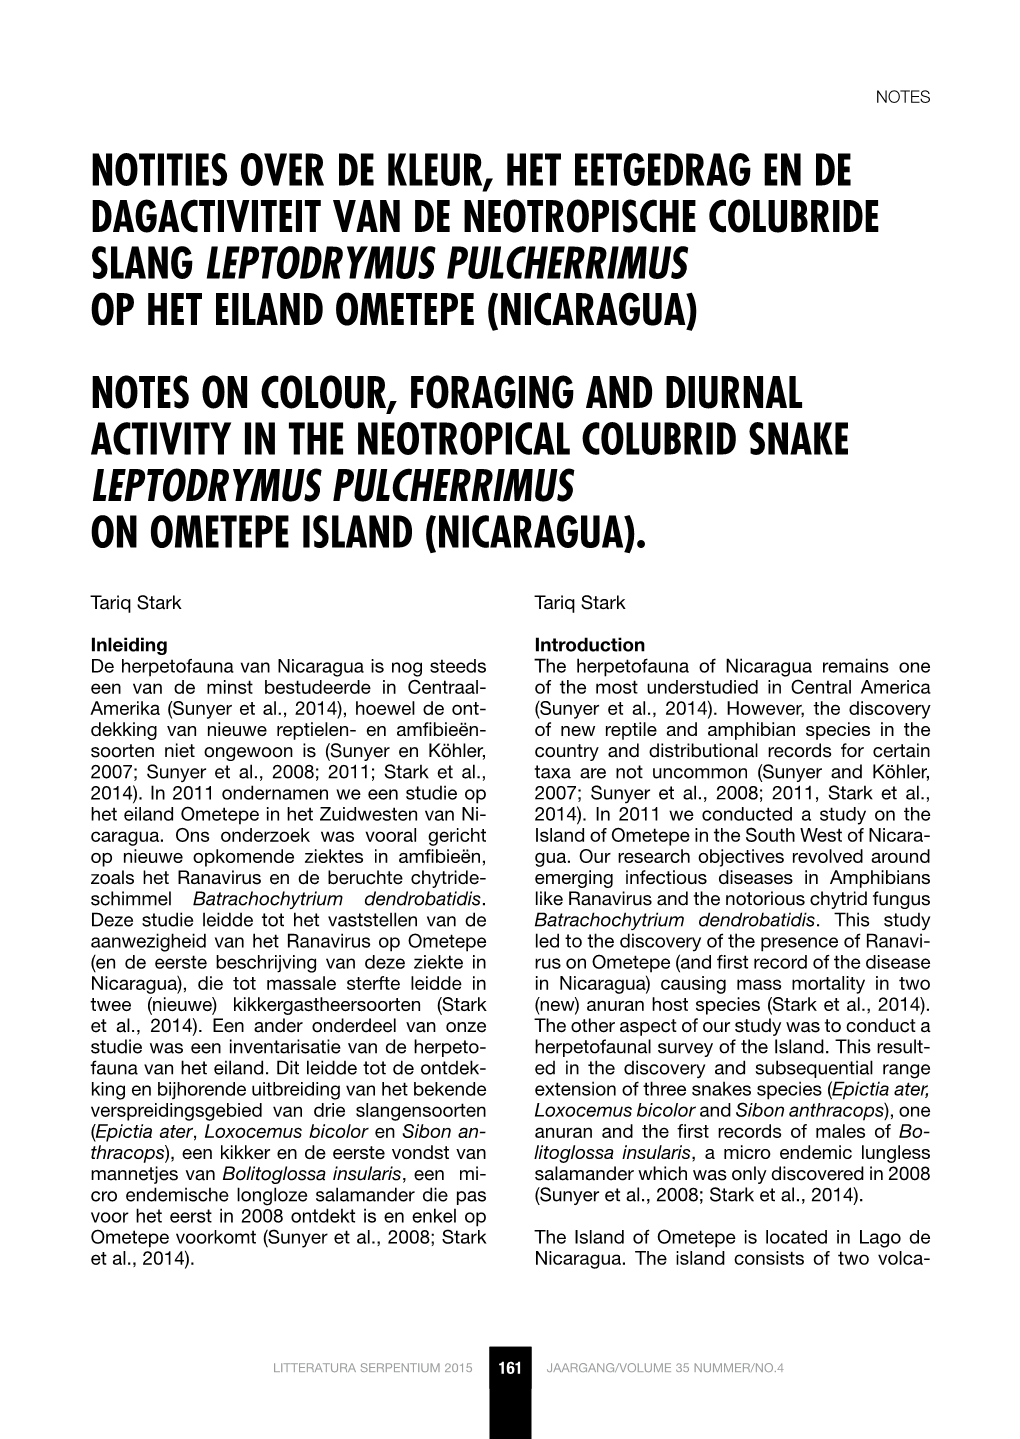 Notes on Colour, Foraging and Diurnal Activity in the Neotropical Colubrid Snake Leptodrymus Pulcherrimus on Ometepe Island (Nicaragua)